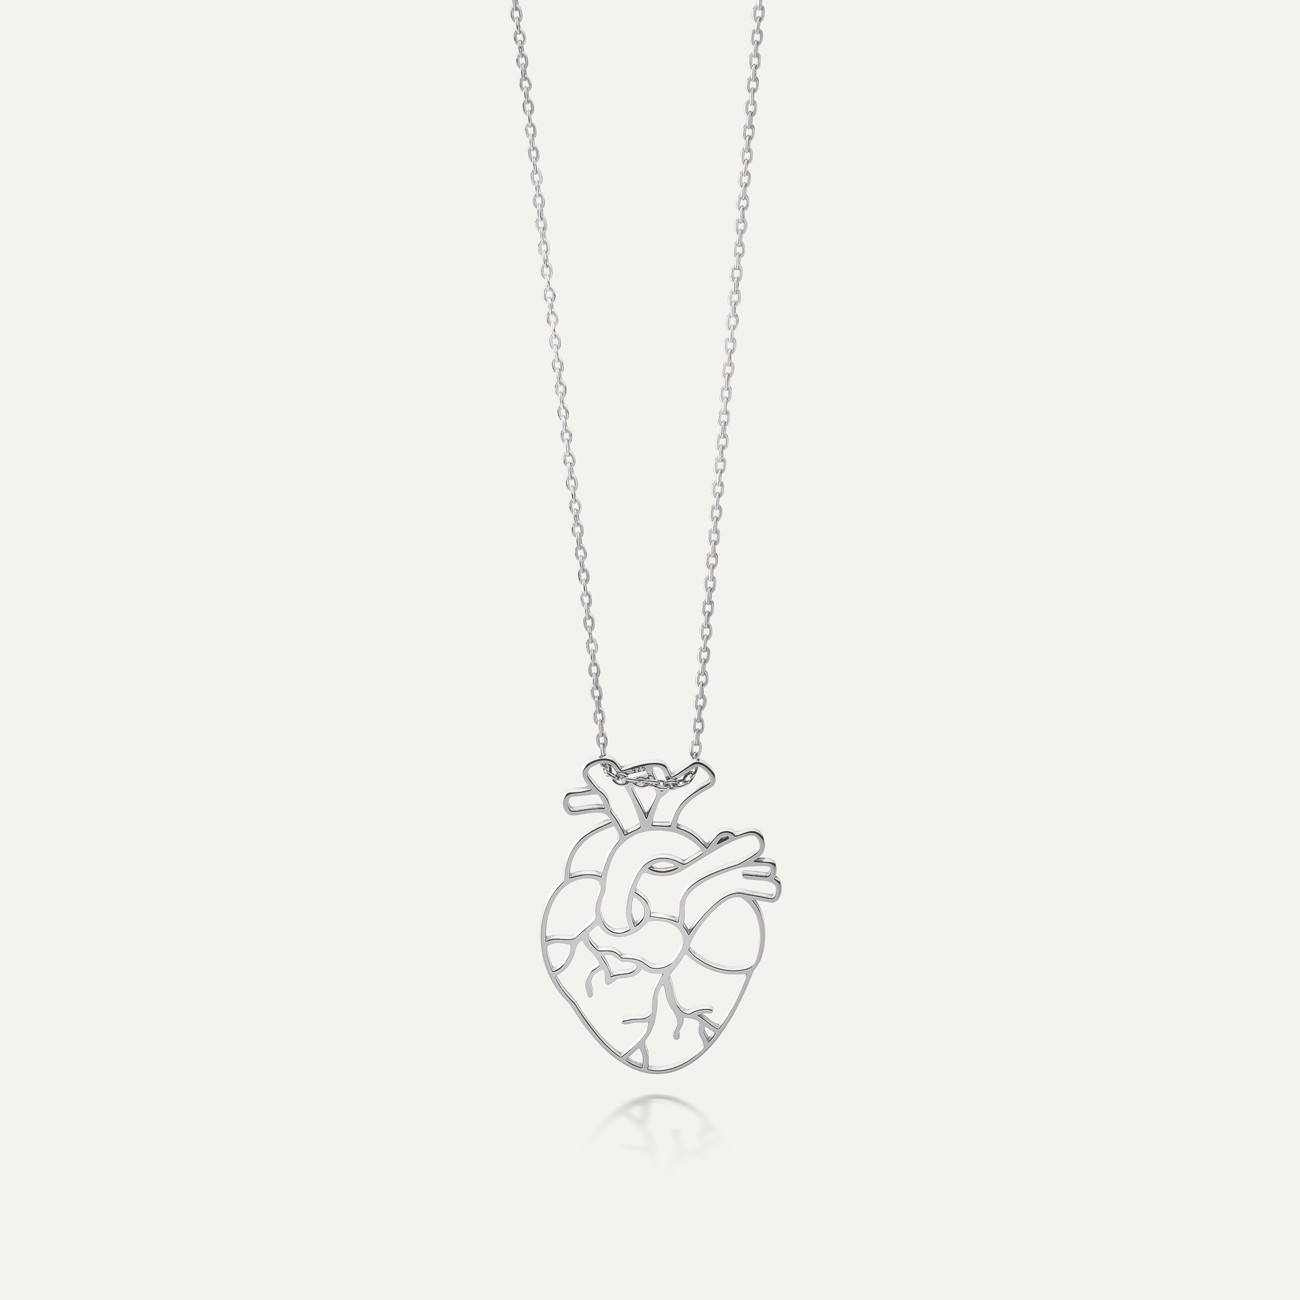 T°ra'vel'' Necklace - Tree & human heart, sterling silver 925